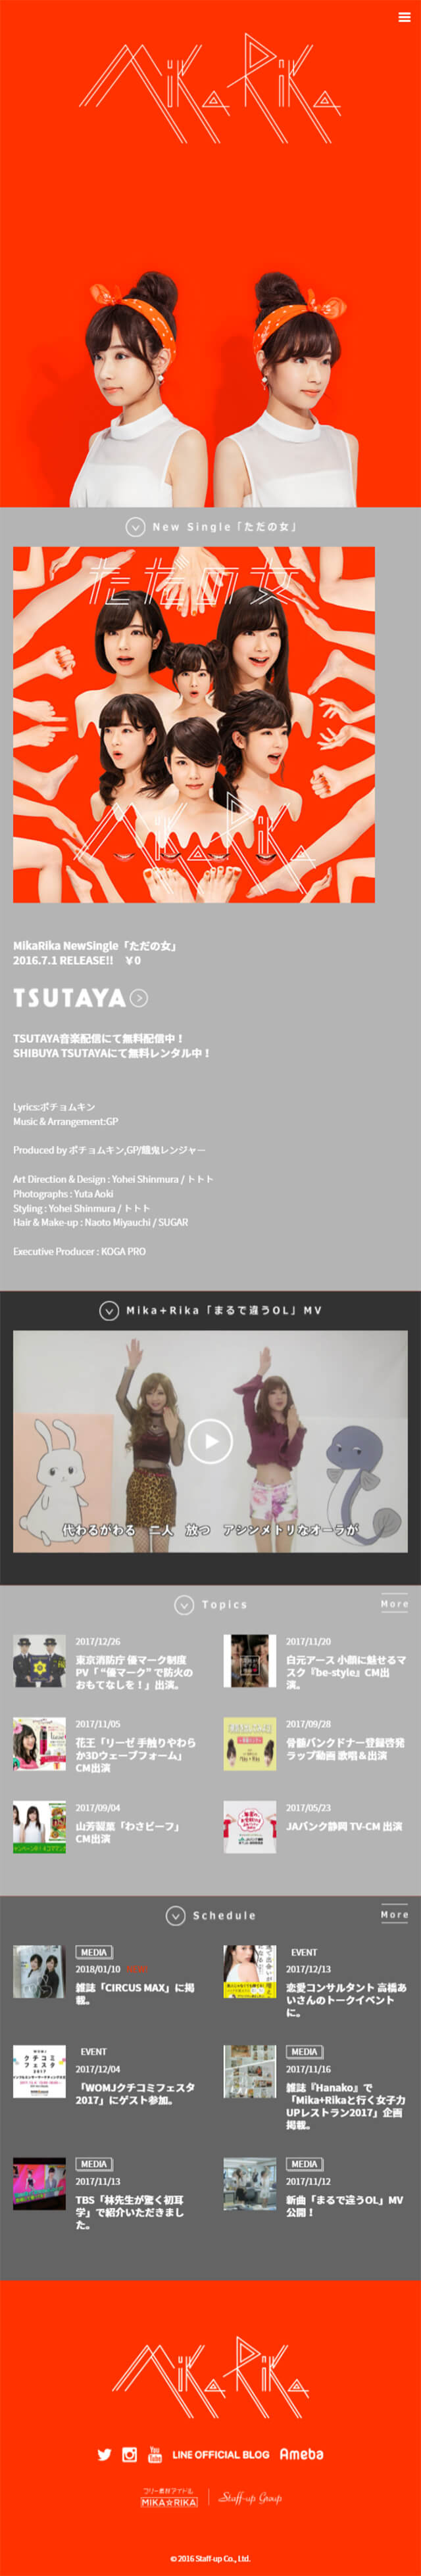 Mika+Rika OFFICIAL WEB SITE (ミカ+リカ)_sp_1